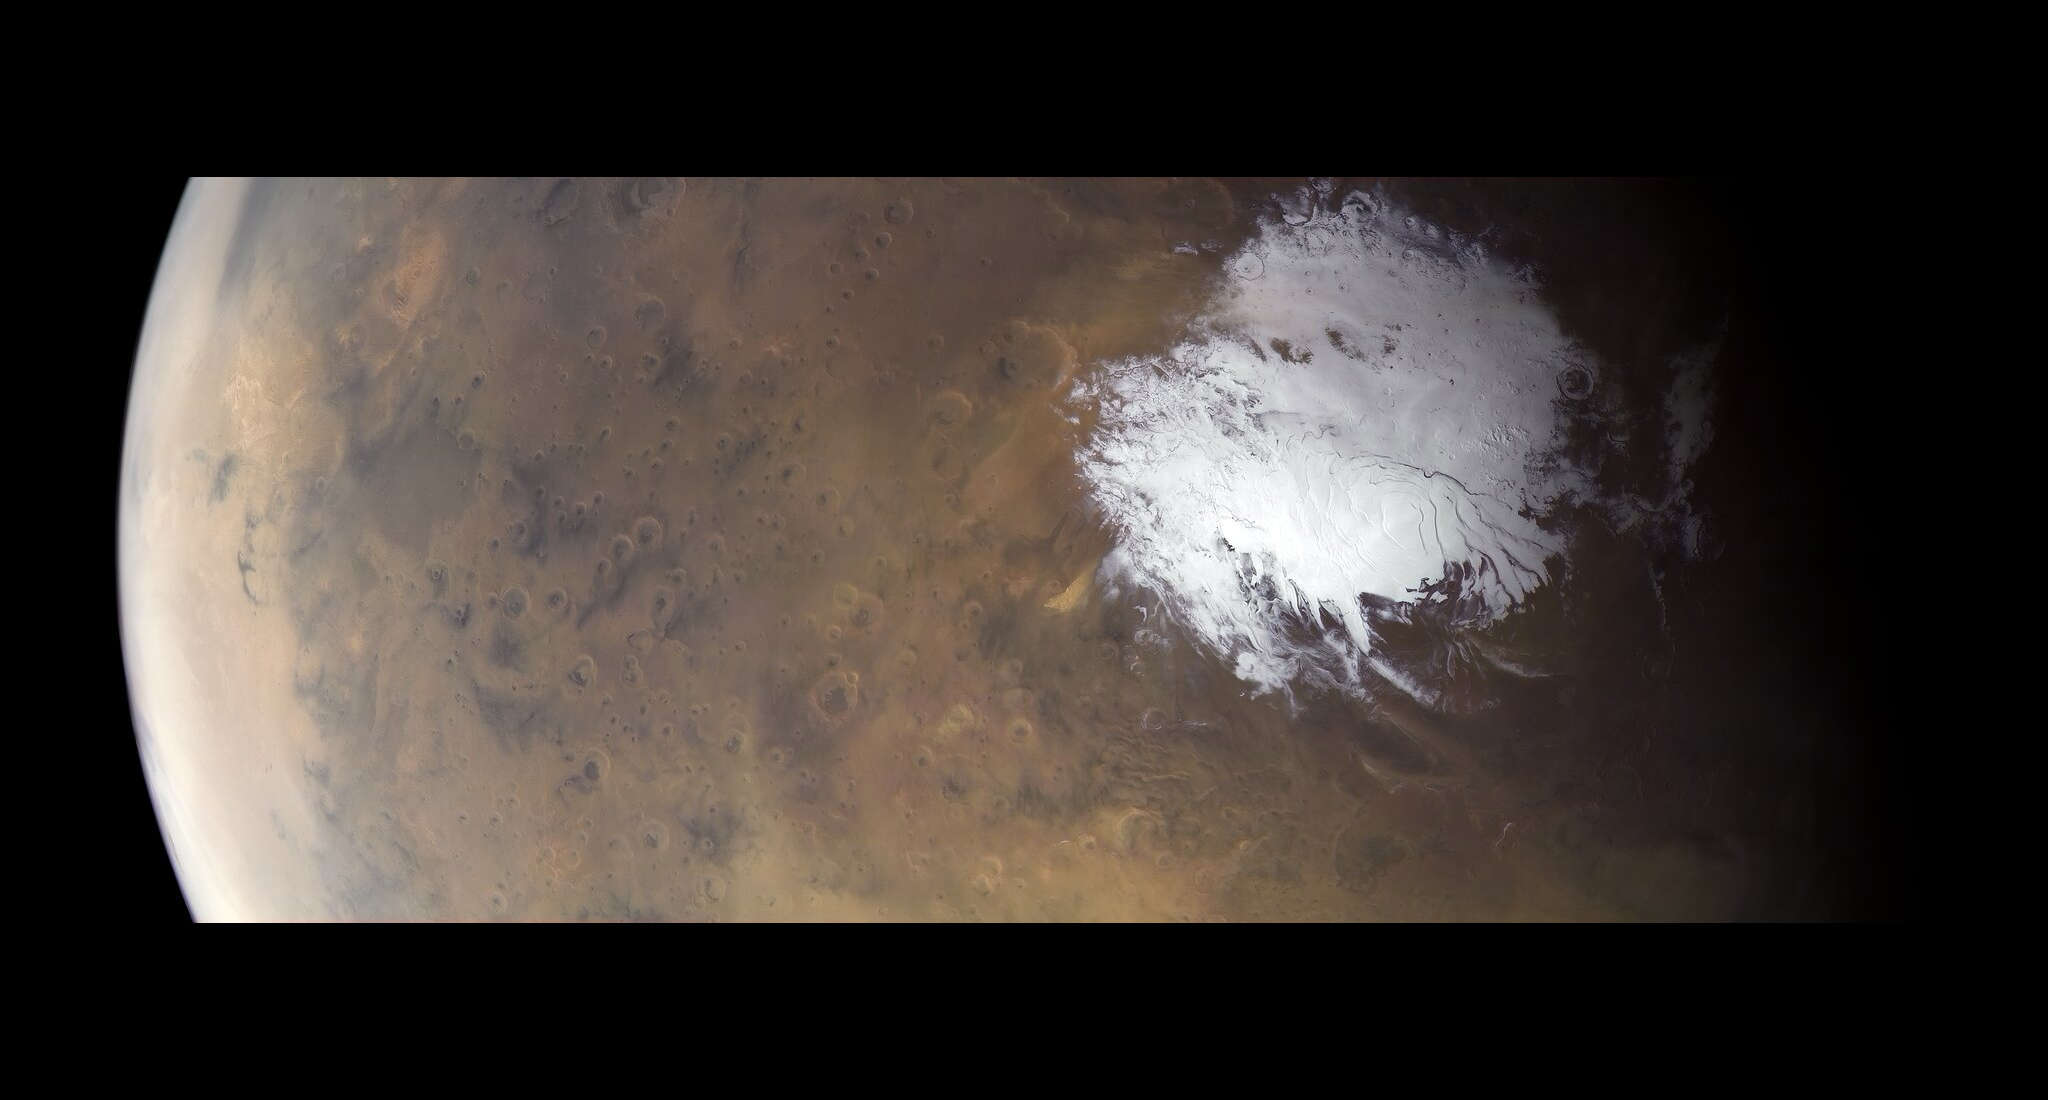 So is there liquid water under the Martian ice cap or not?